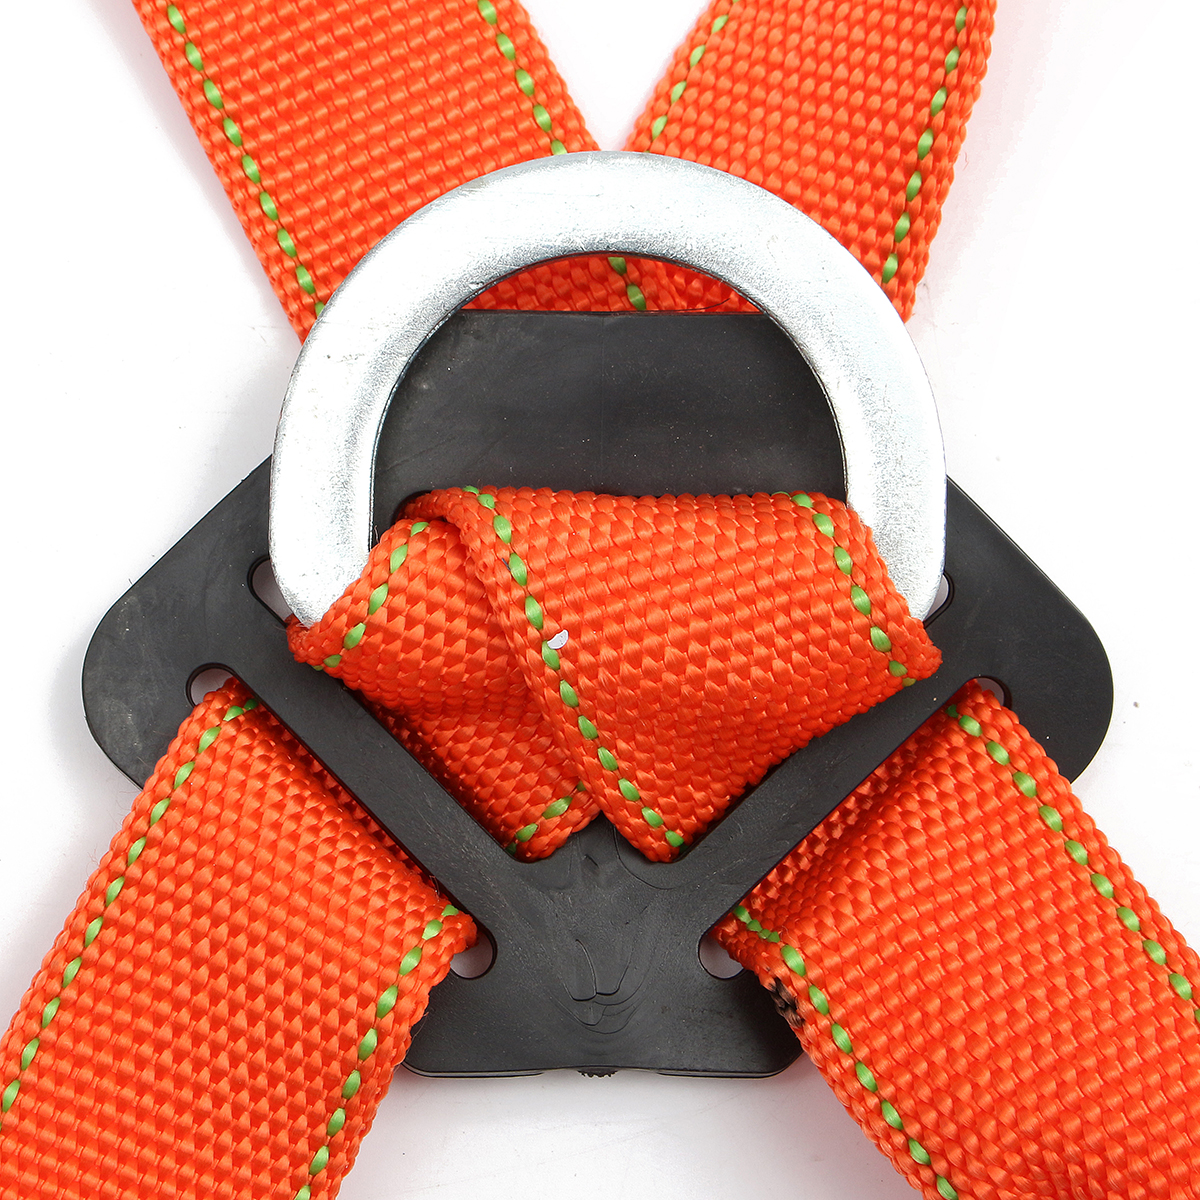 Outdoor-Full-Body-Climbing-Safety-Belt-Rescue-Rappelling-Aloft-Work-Suspension-Strap-Harness-1132532-6